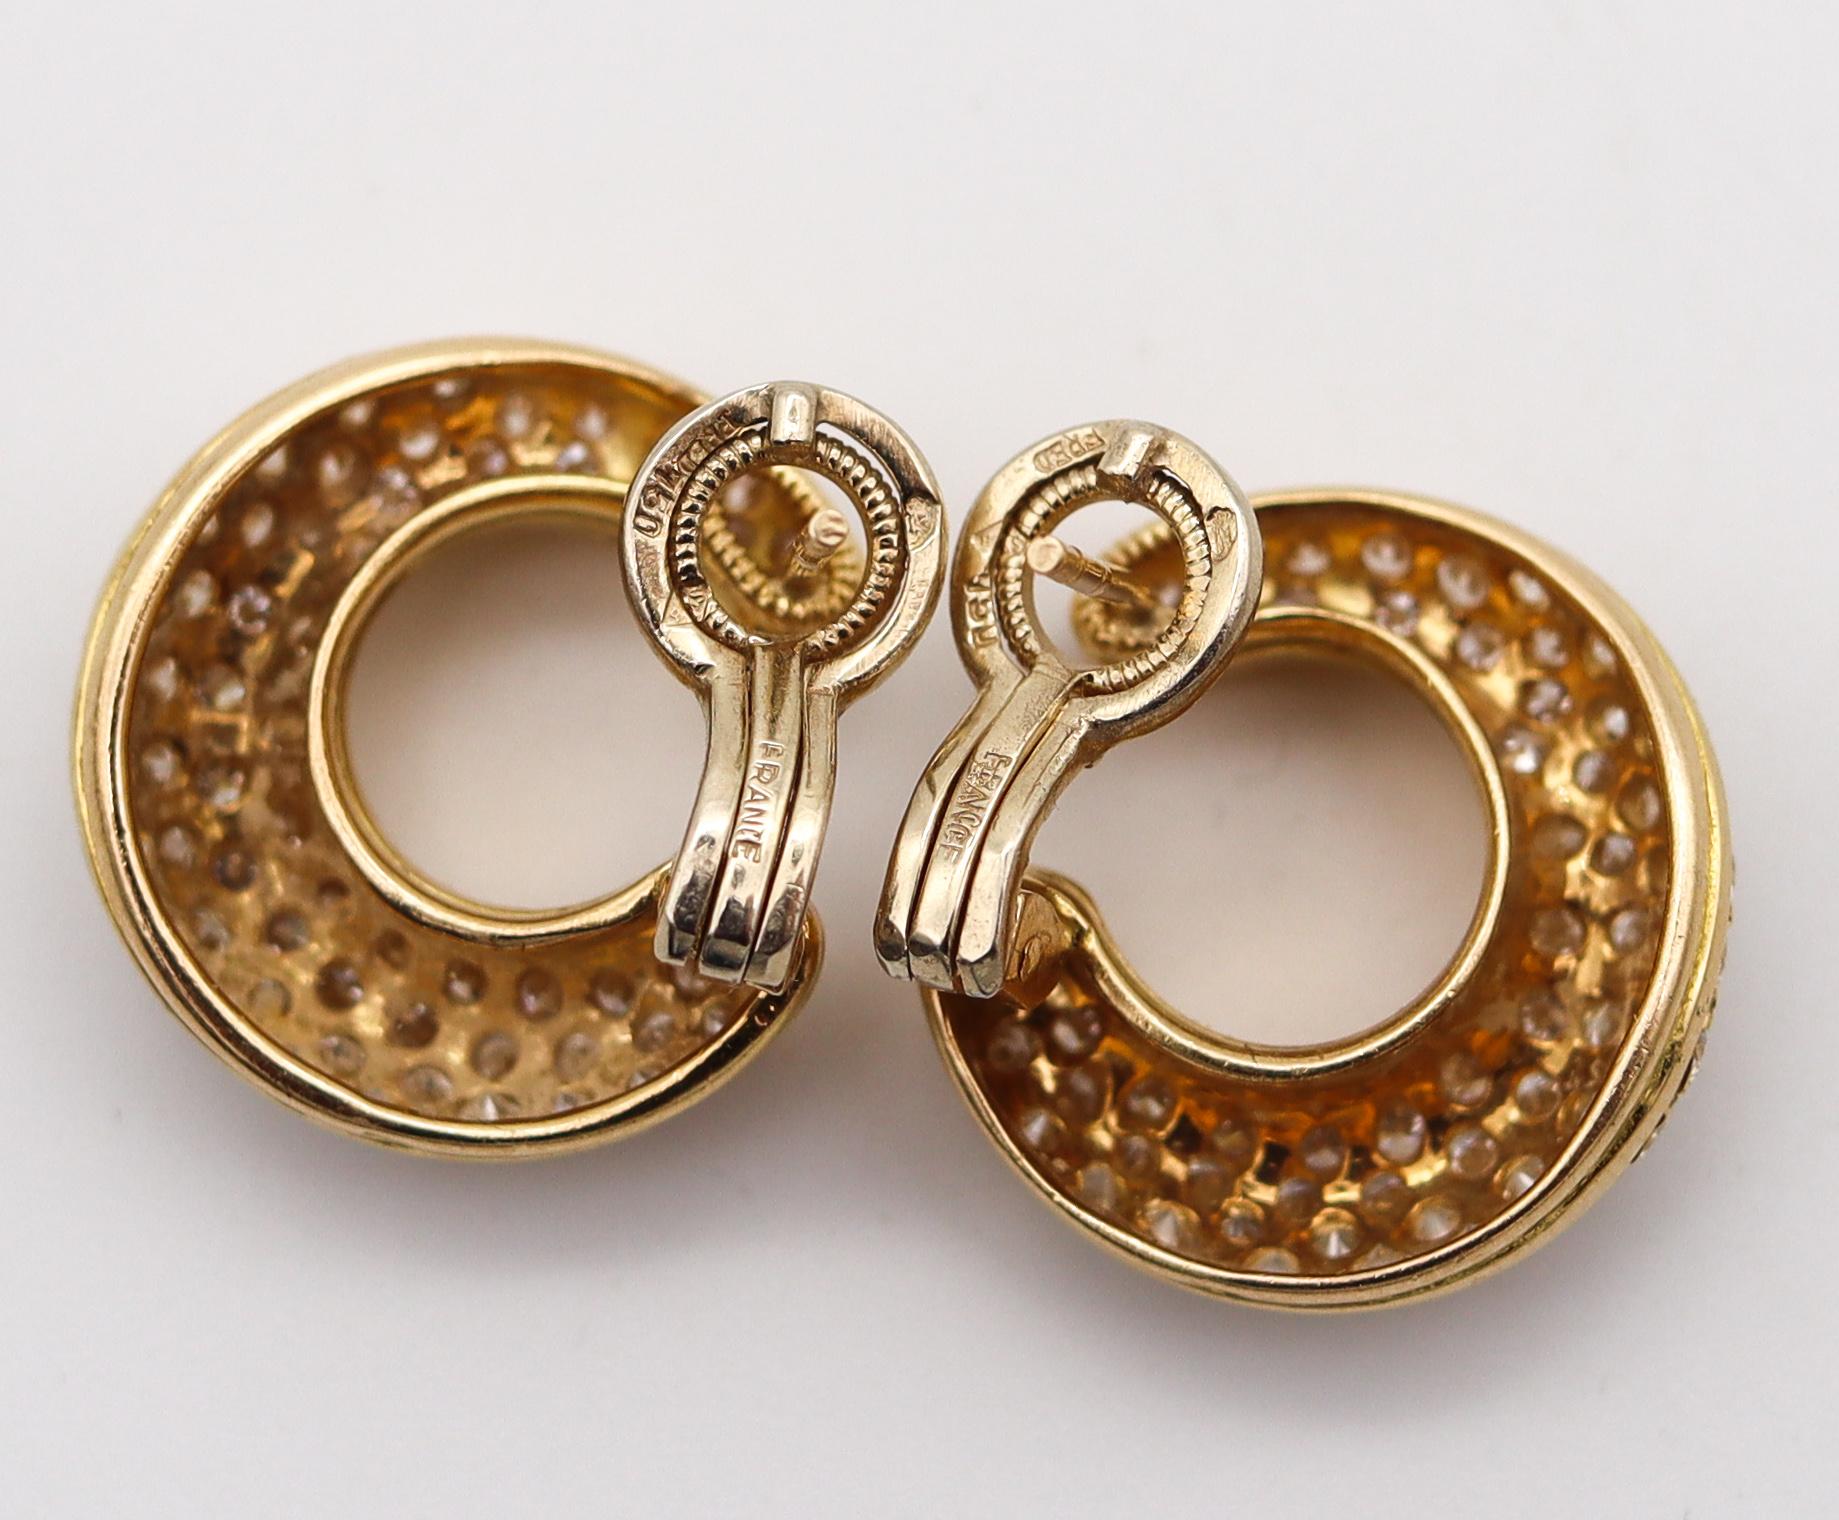 Brilliant Cut Fred of Paris Clips On Earrings In 18Kt Yellow Gold With 3.54 Ctw In VVS Diamond